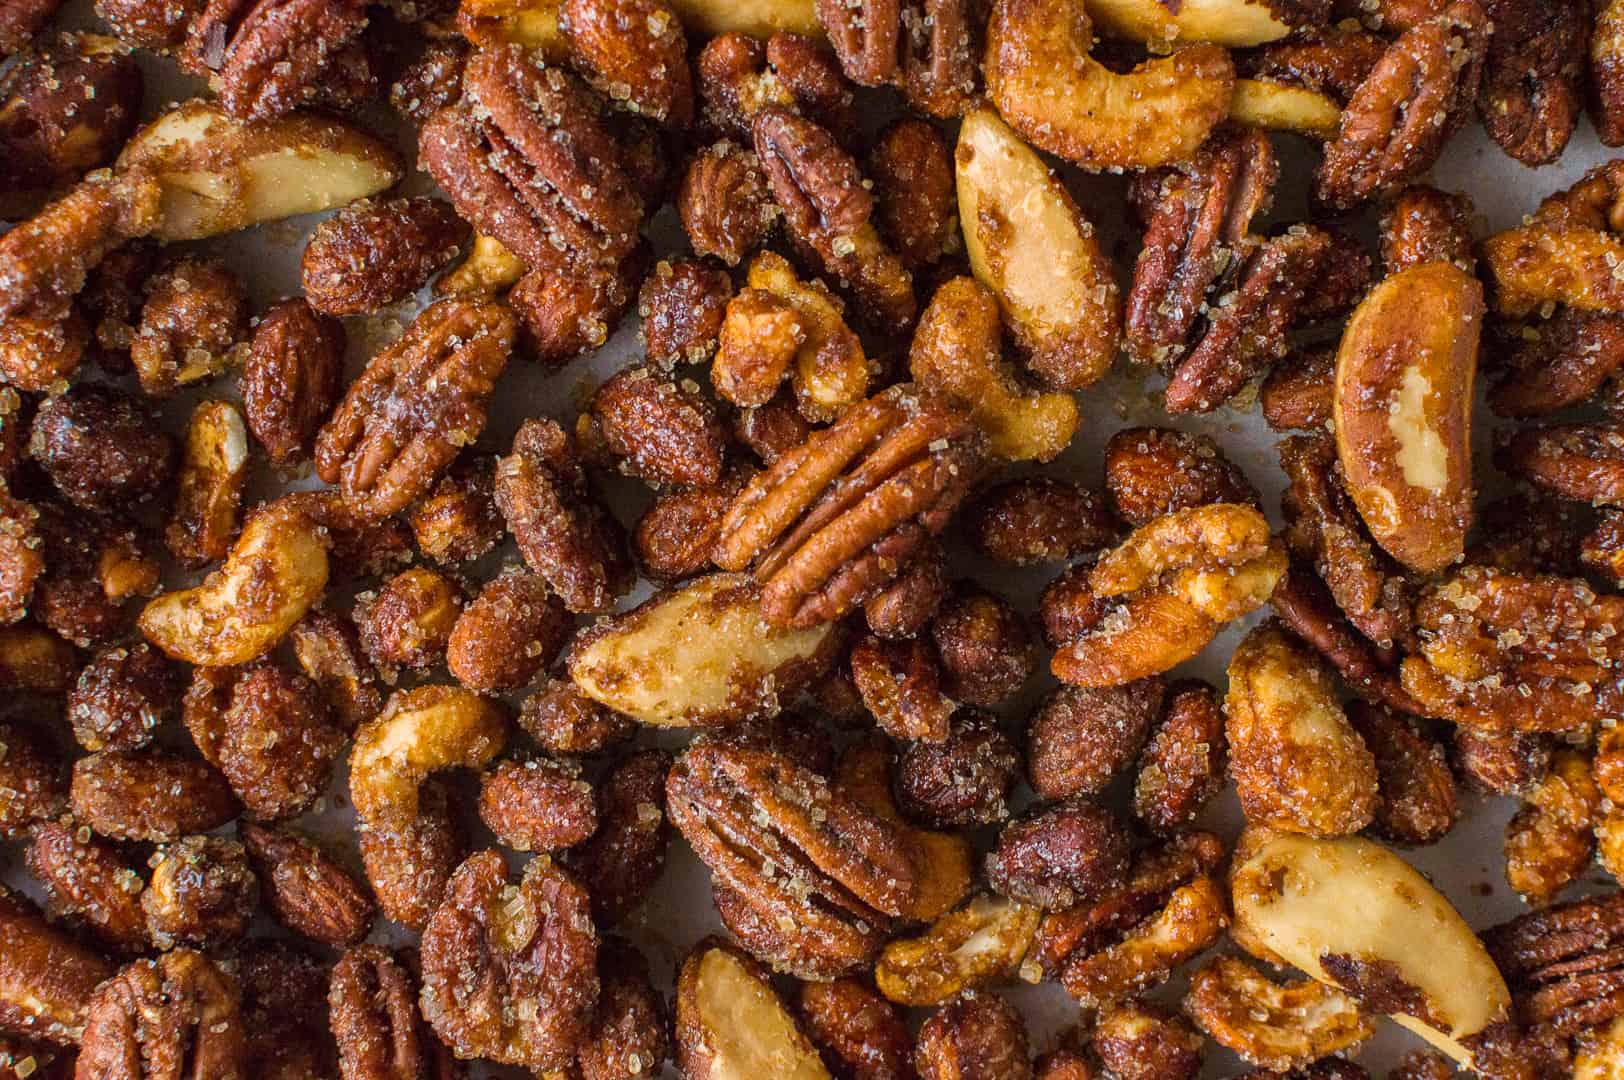 Spiced honey roasted nuts - a little sweet, a little spicy, a little salty and a lot addictive!